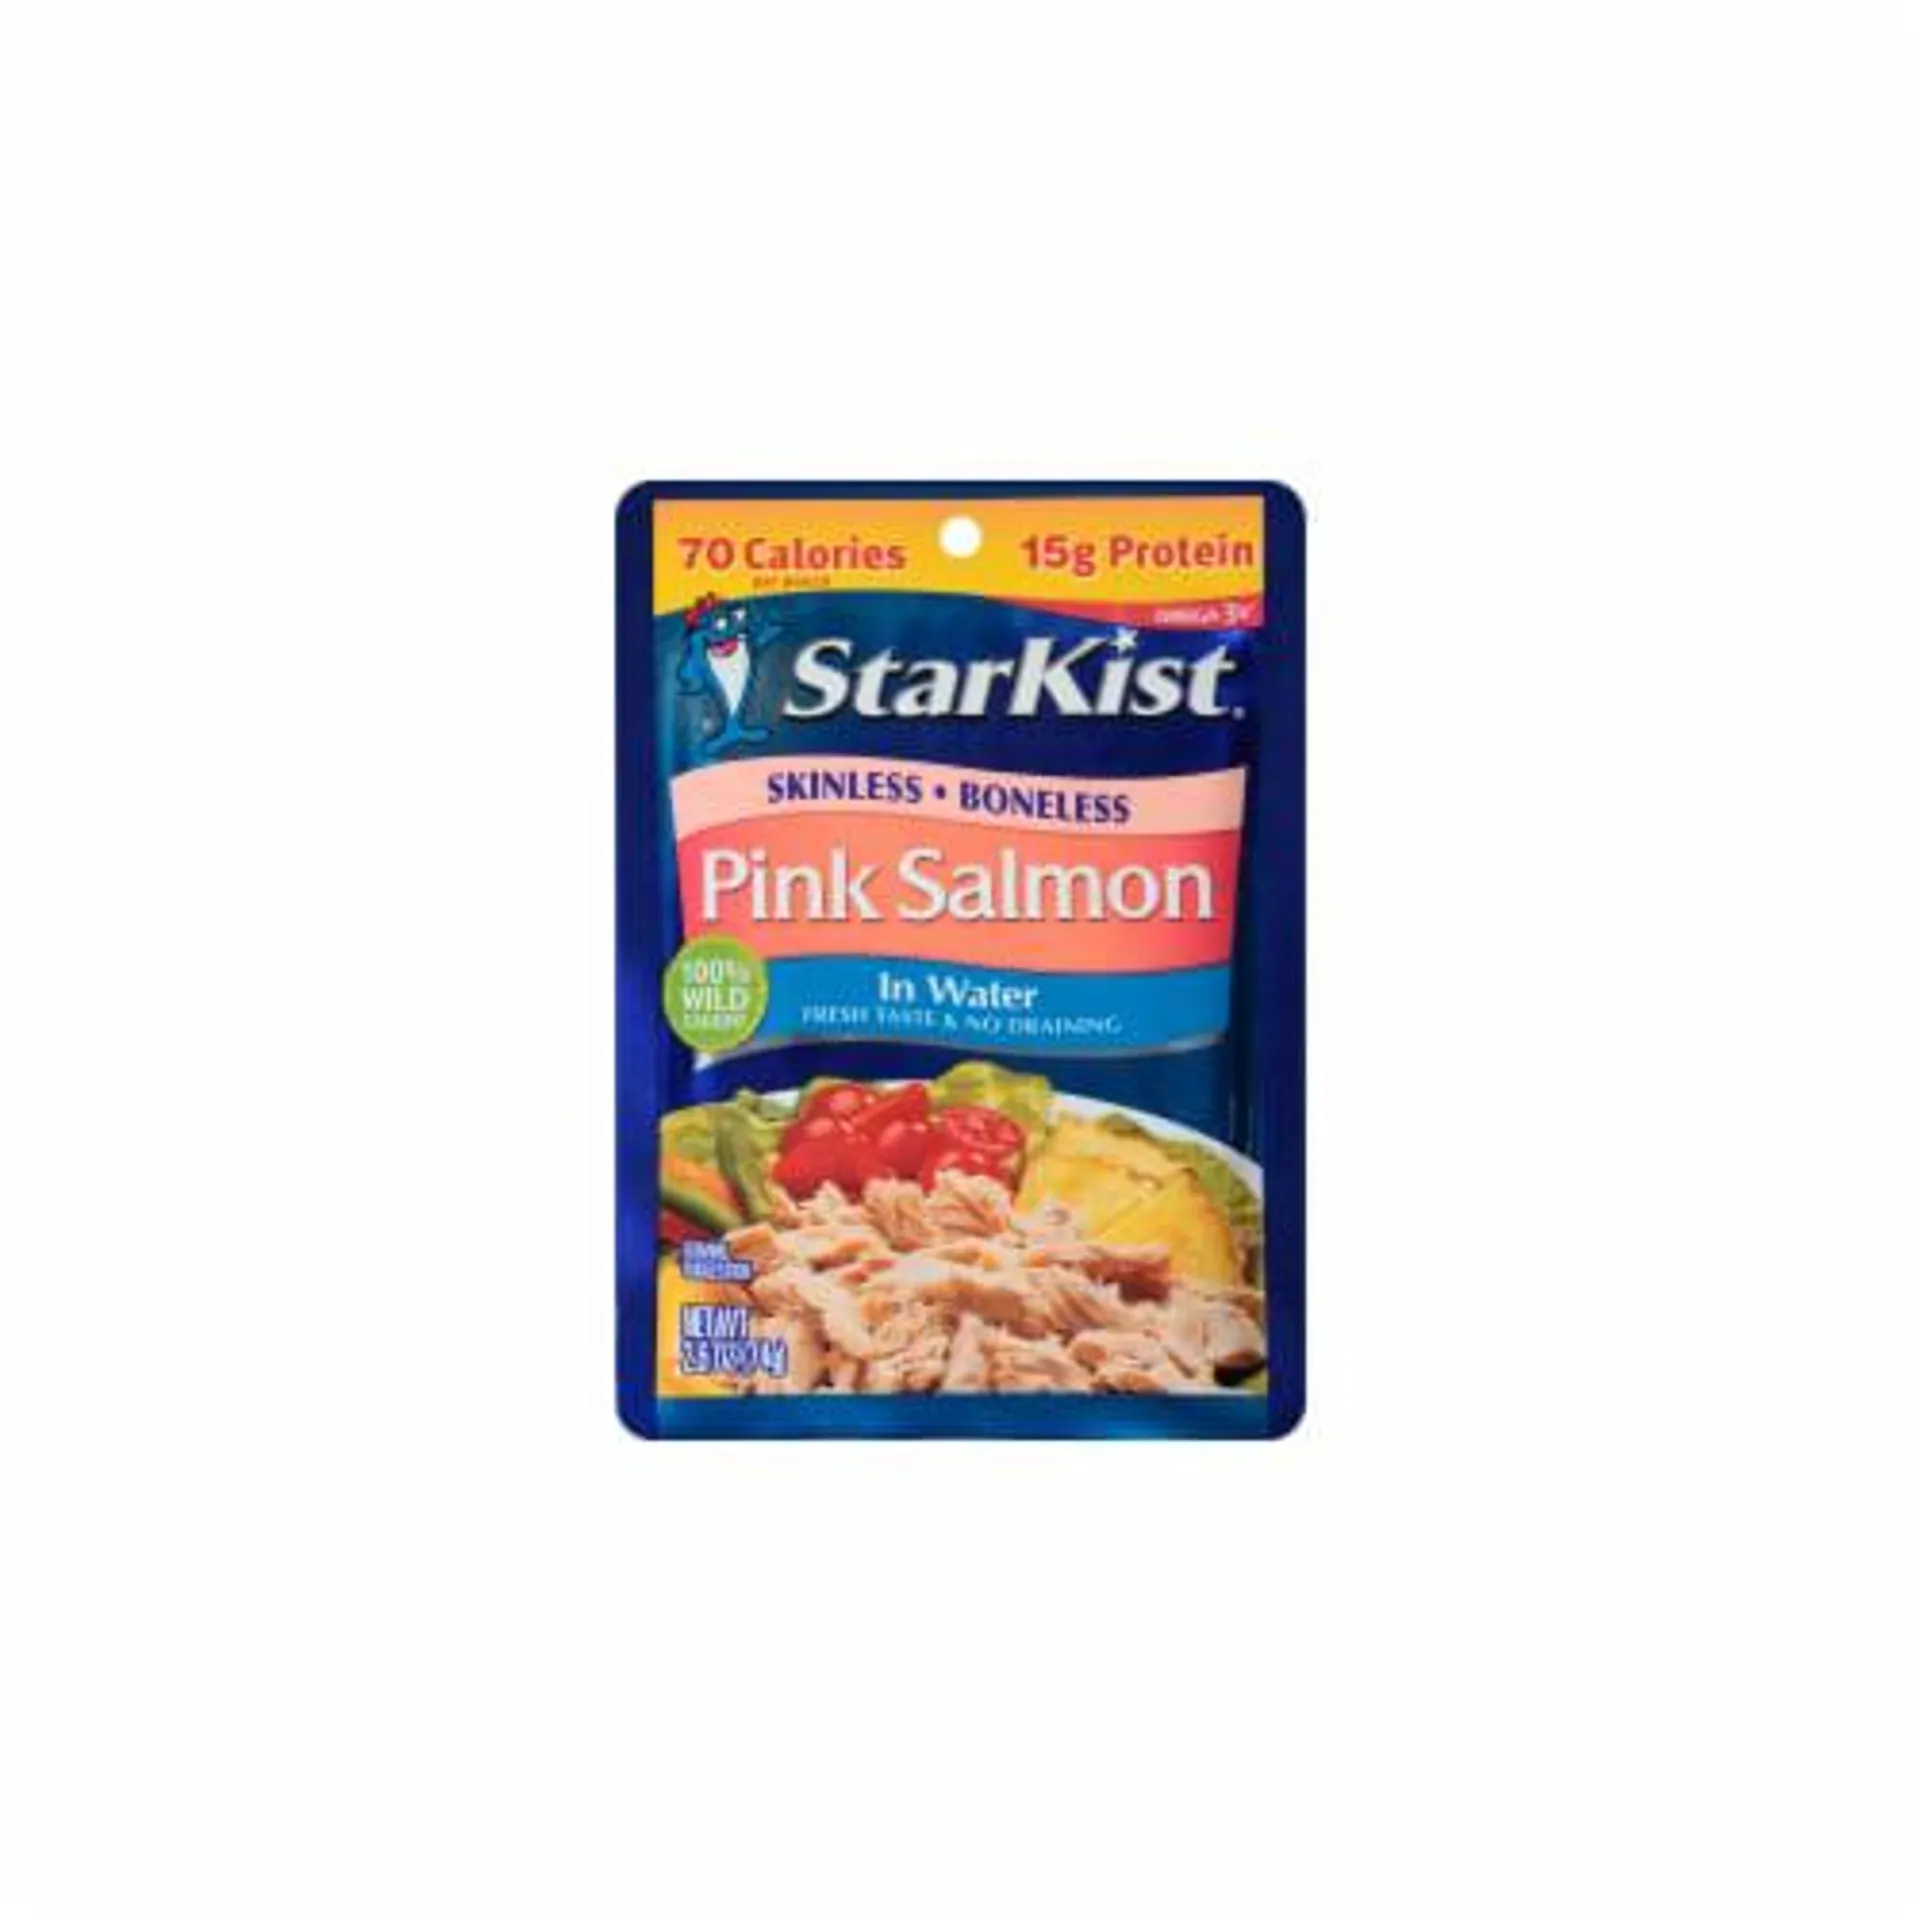 StarKist Skinless and Boneless Pink Salmon in Water, 2.6 Ounce (Pack of 14)